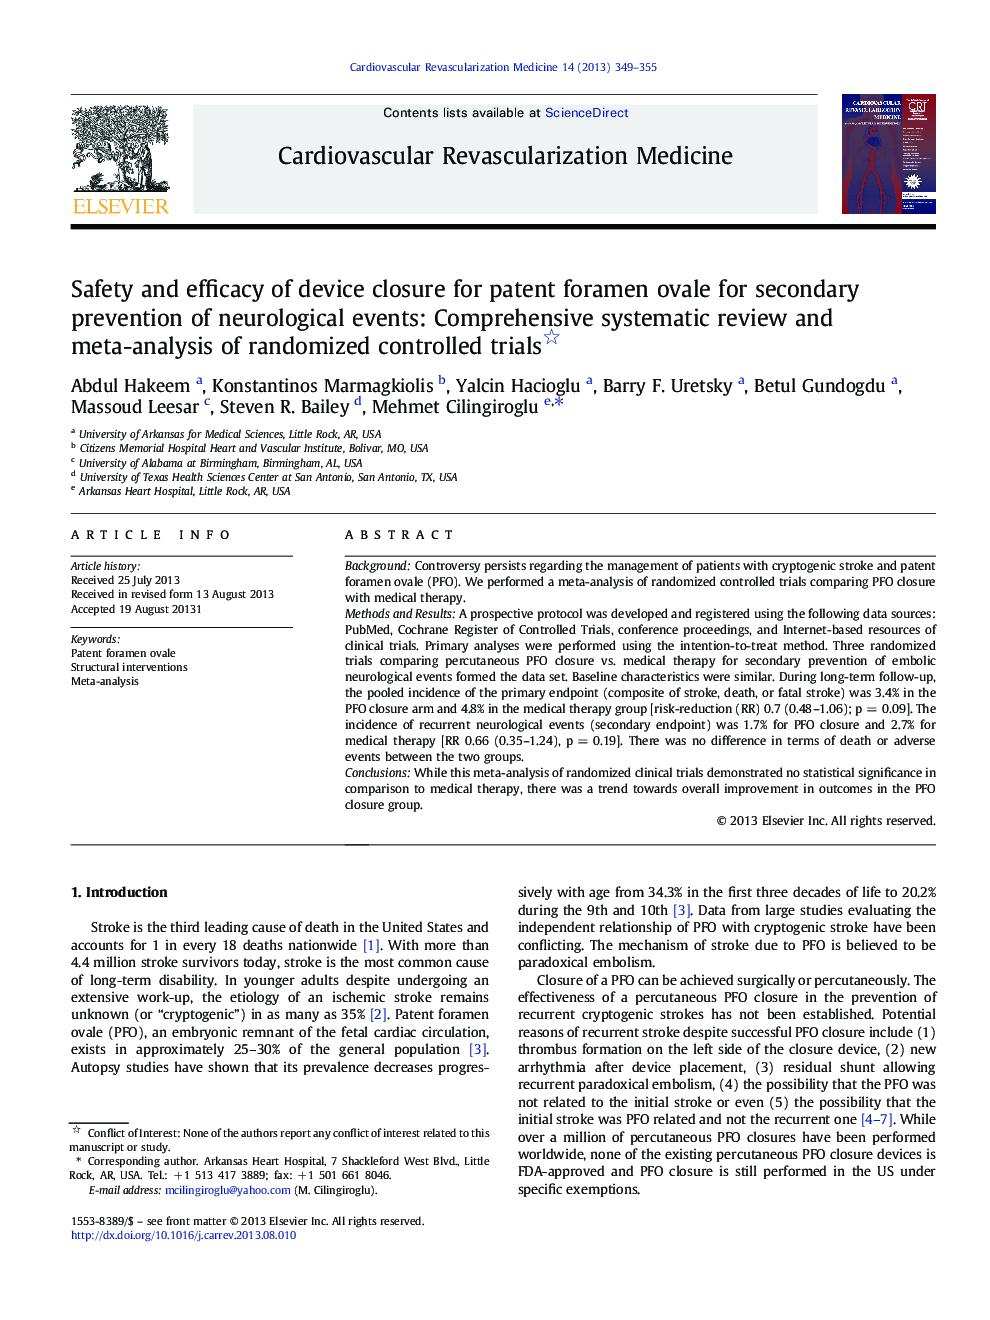 Safety and efficacy of device closure for patent foramen ovale for secondary prevention of neurological events: Comprehensive systematic review and meta-analysis of randomized controlled trials 